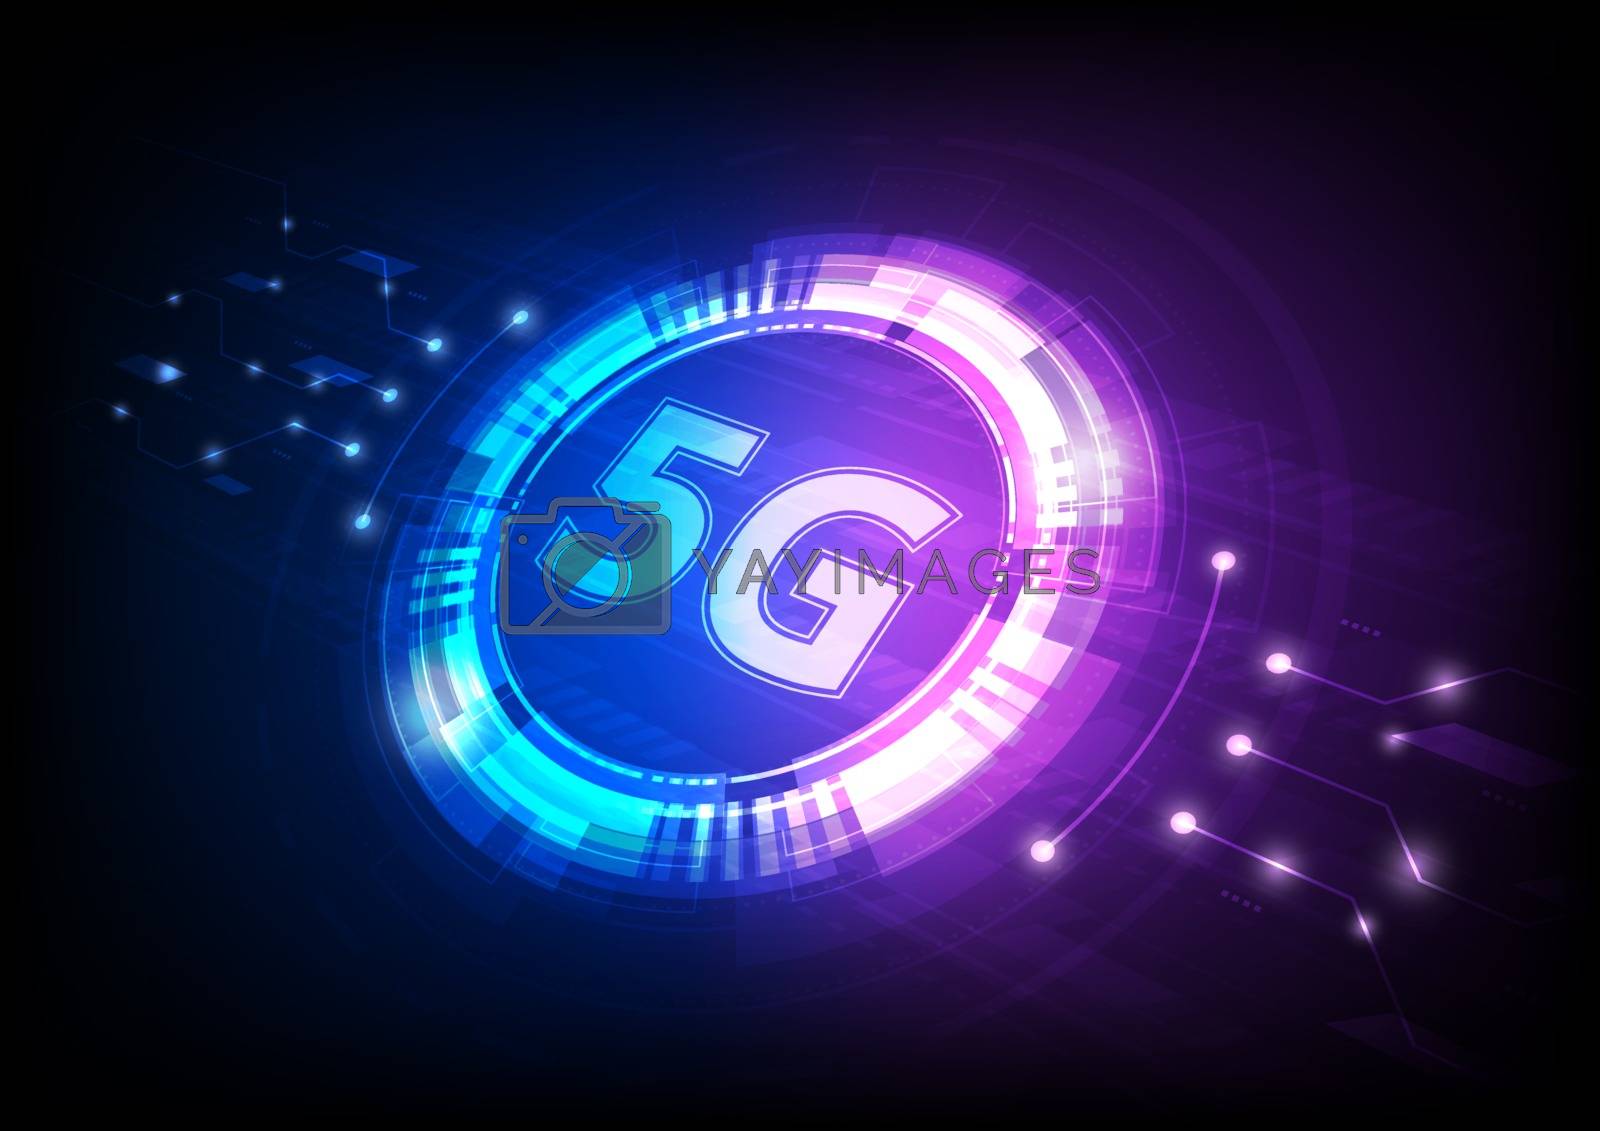 5G technology, symbol with futuristic HUD interface